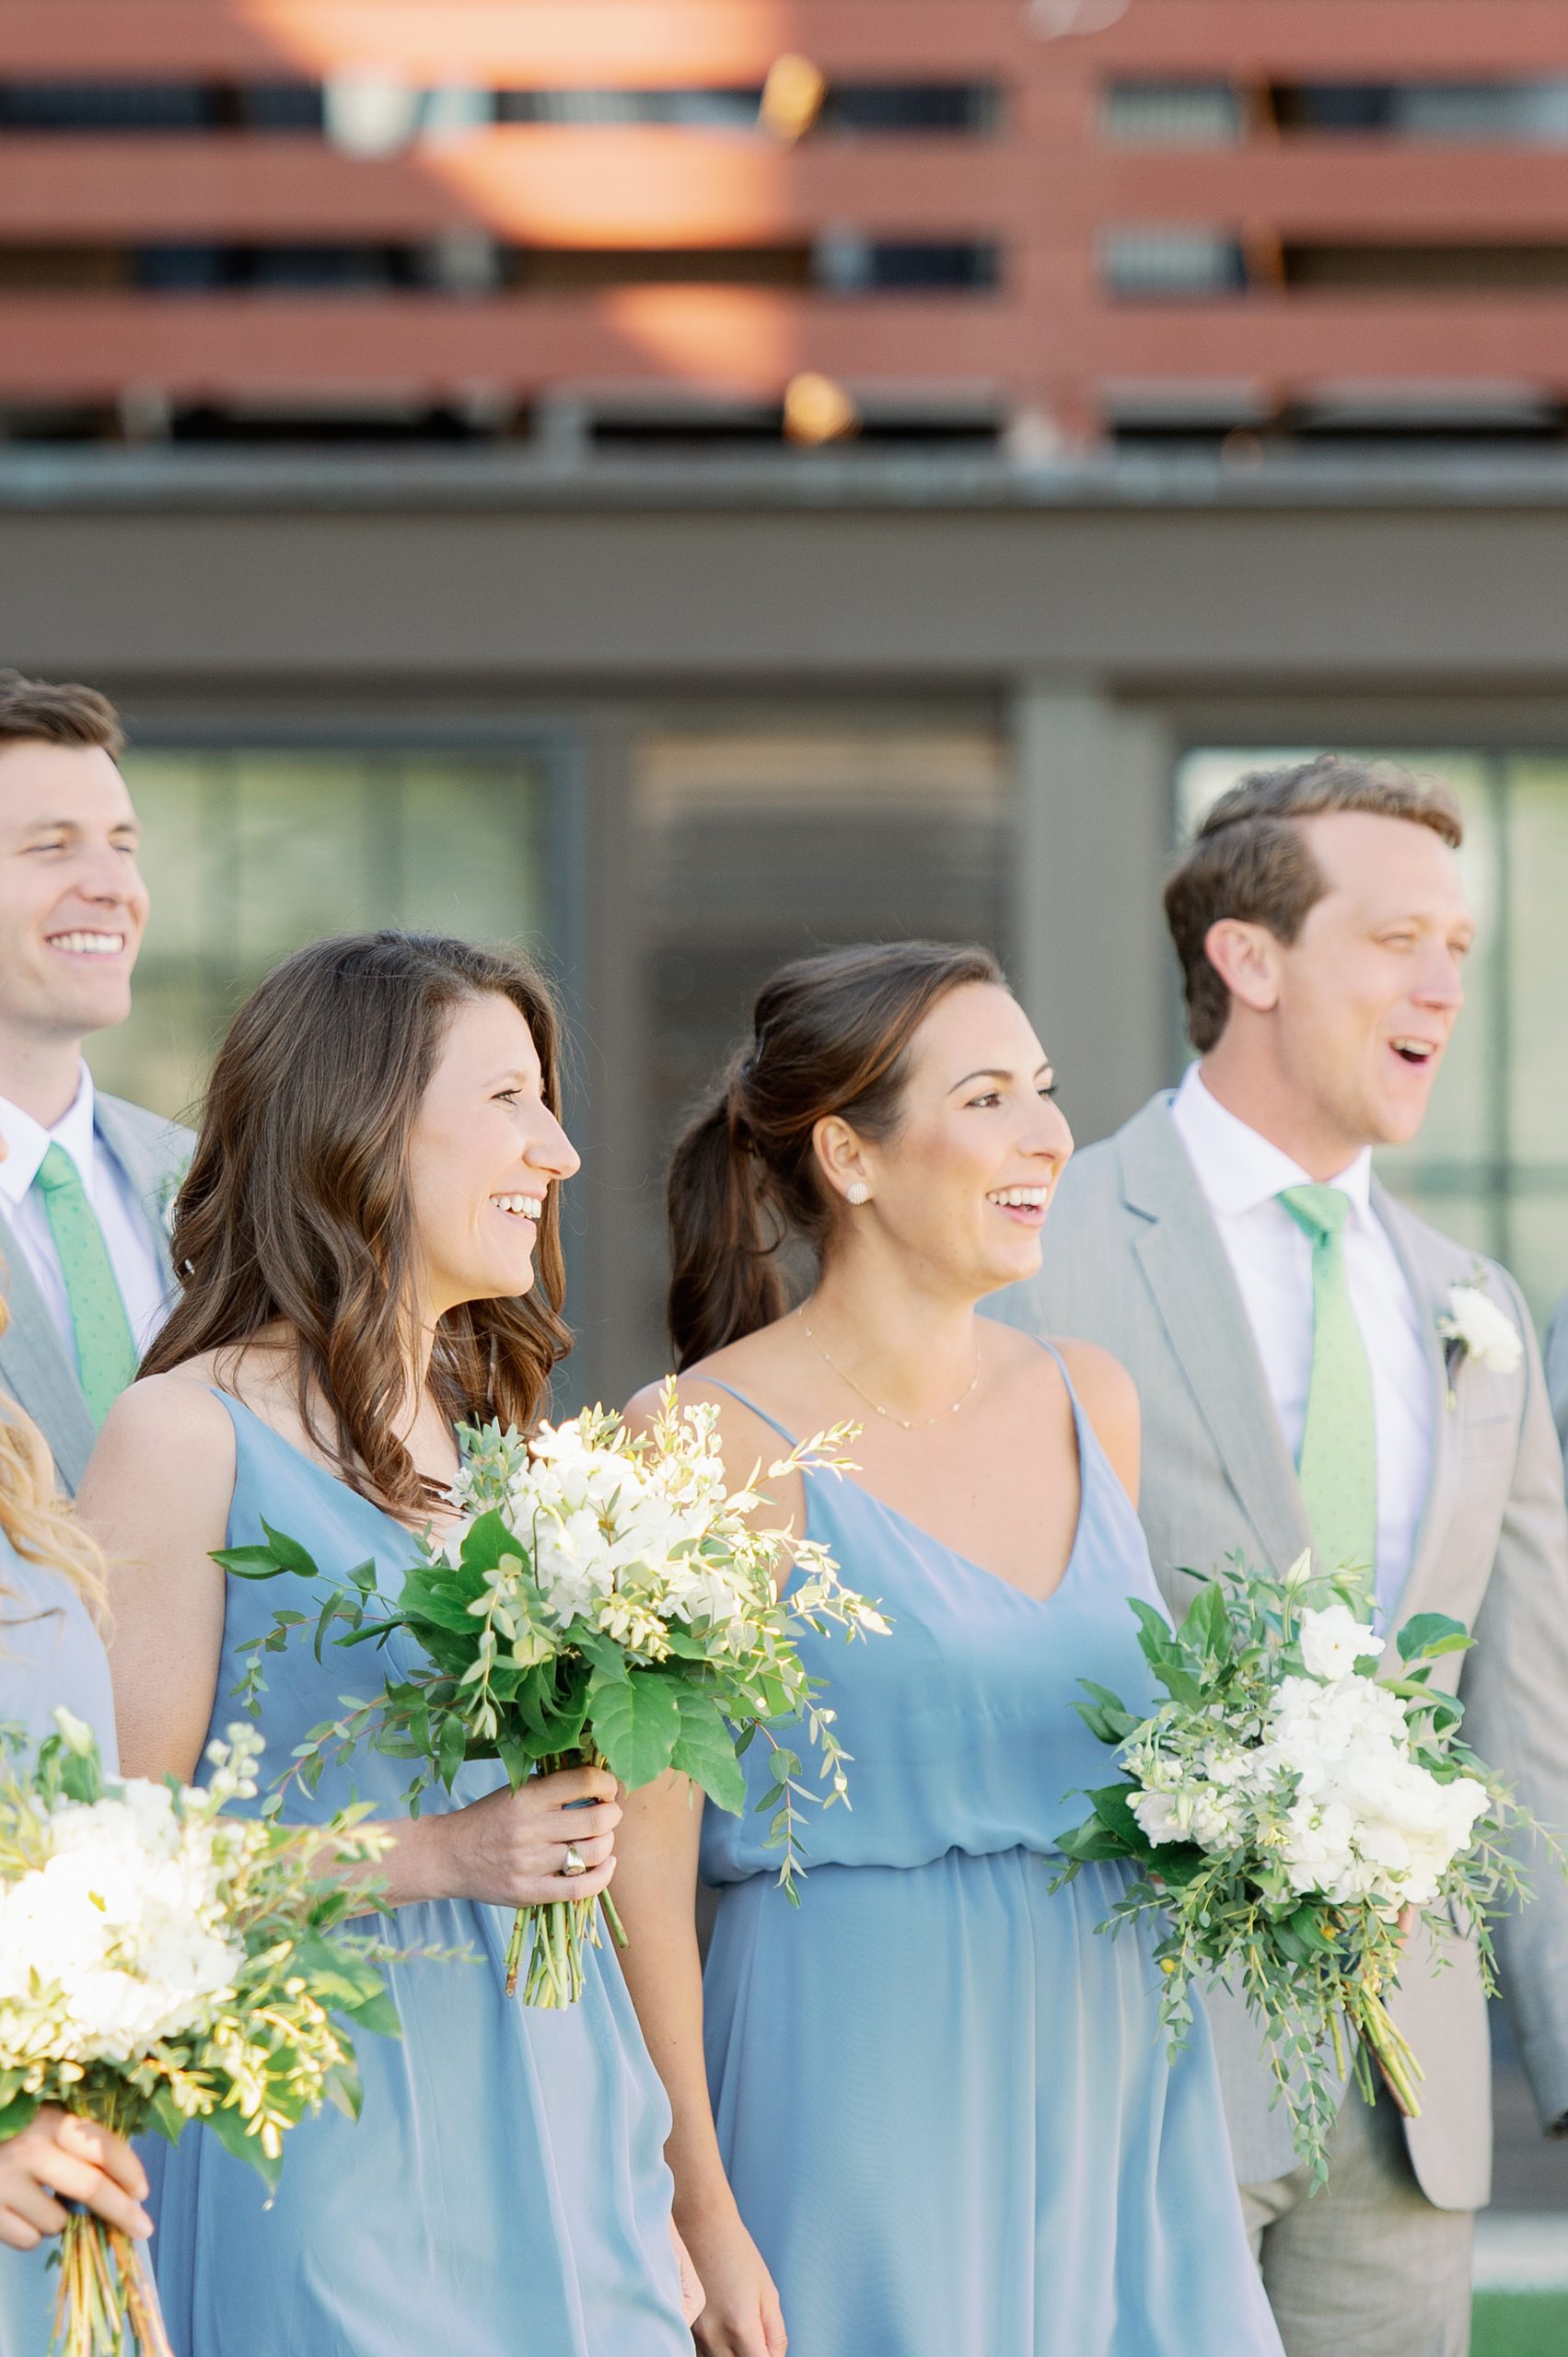 wedding party portraits in pale blue dresses and gray suits